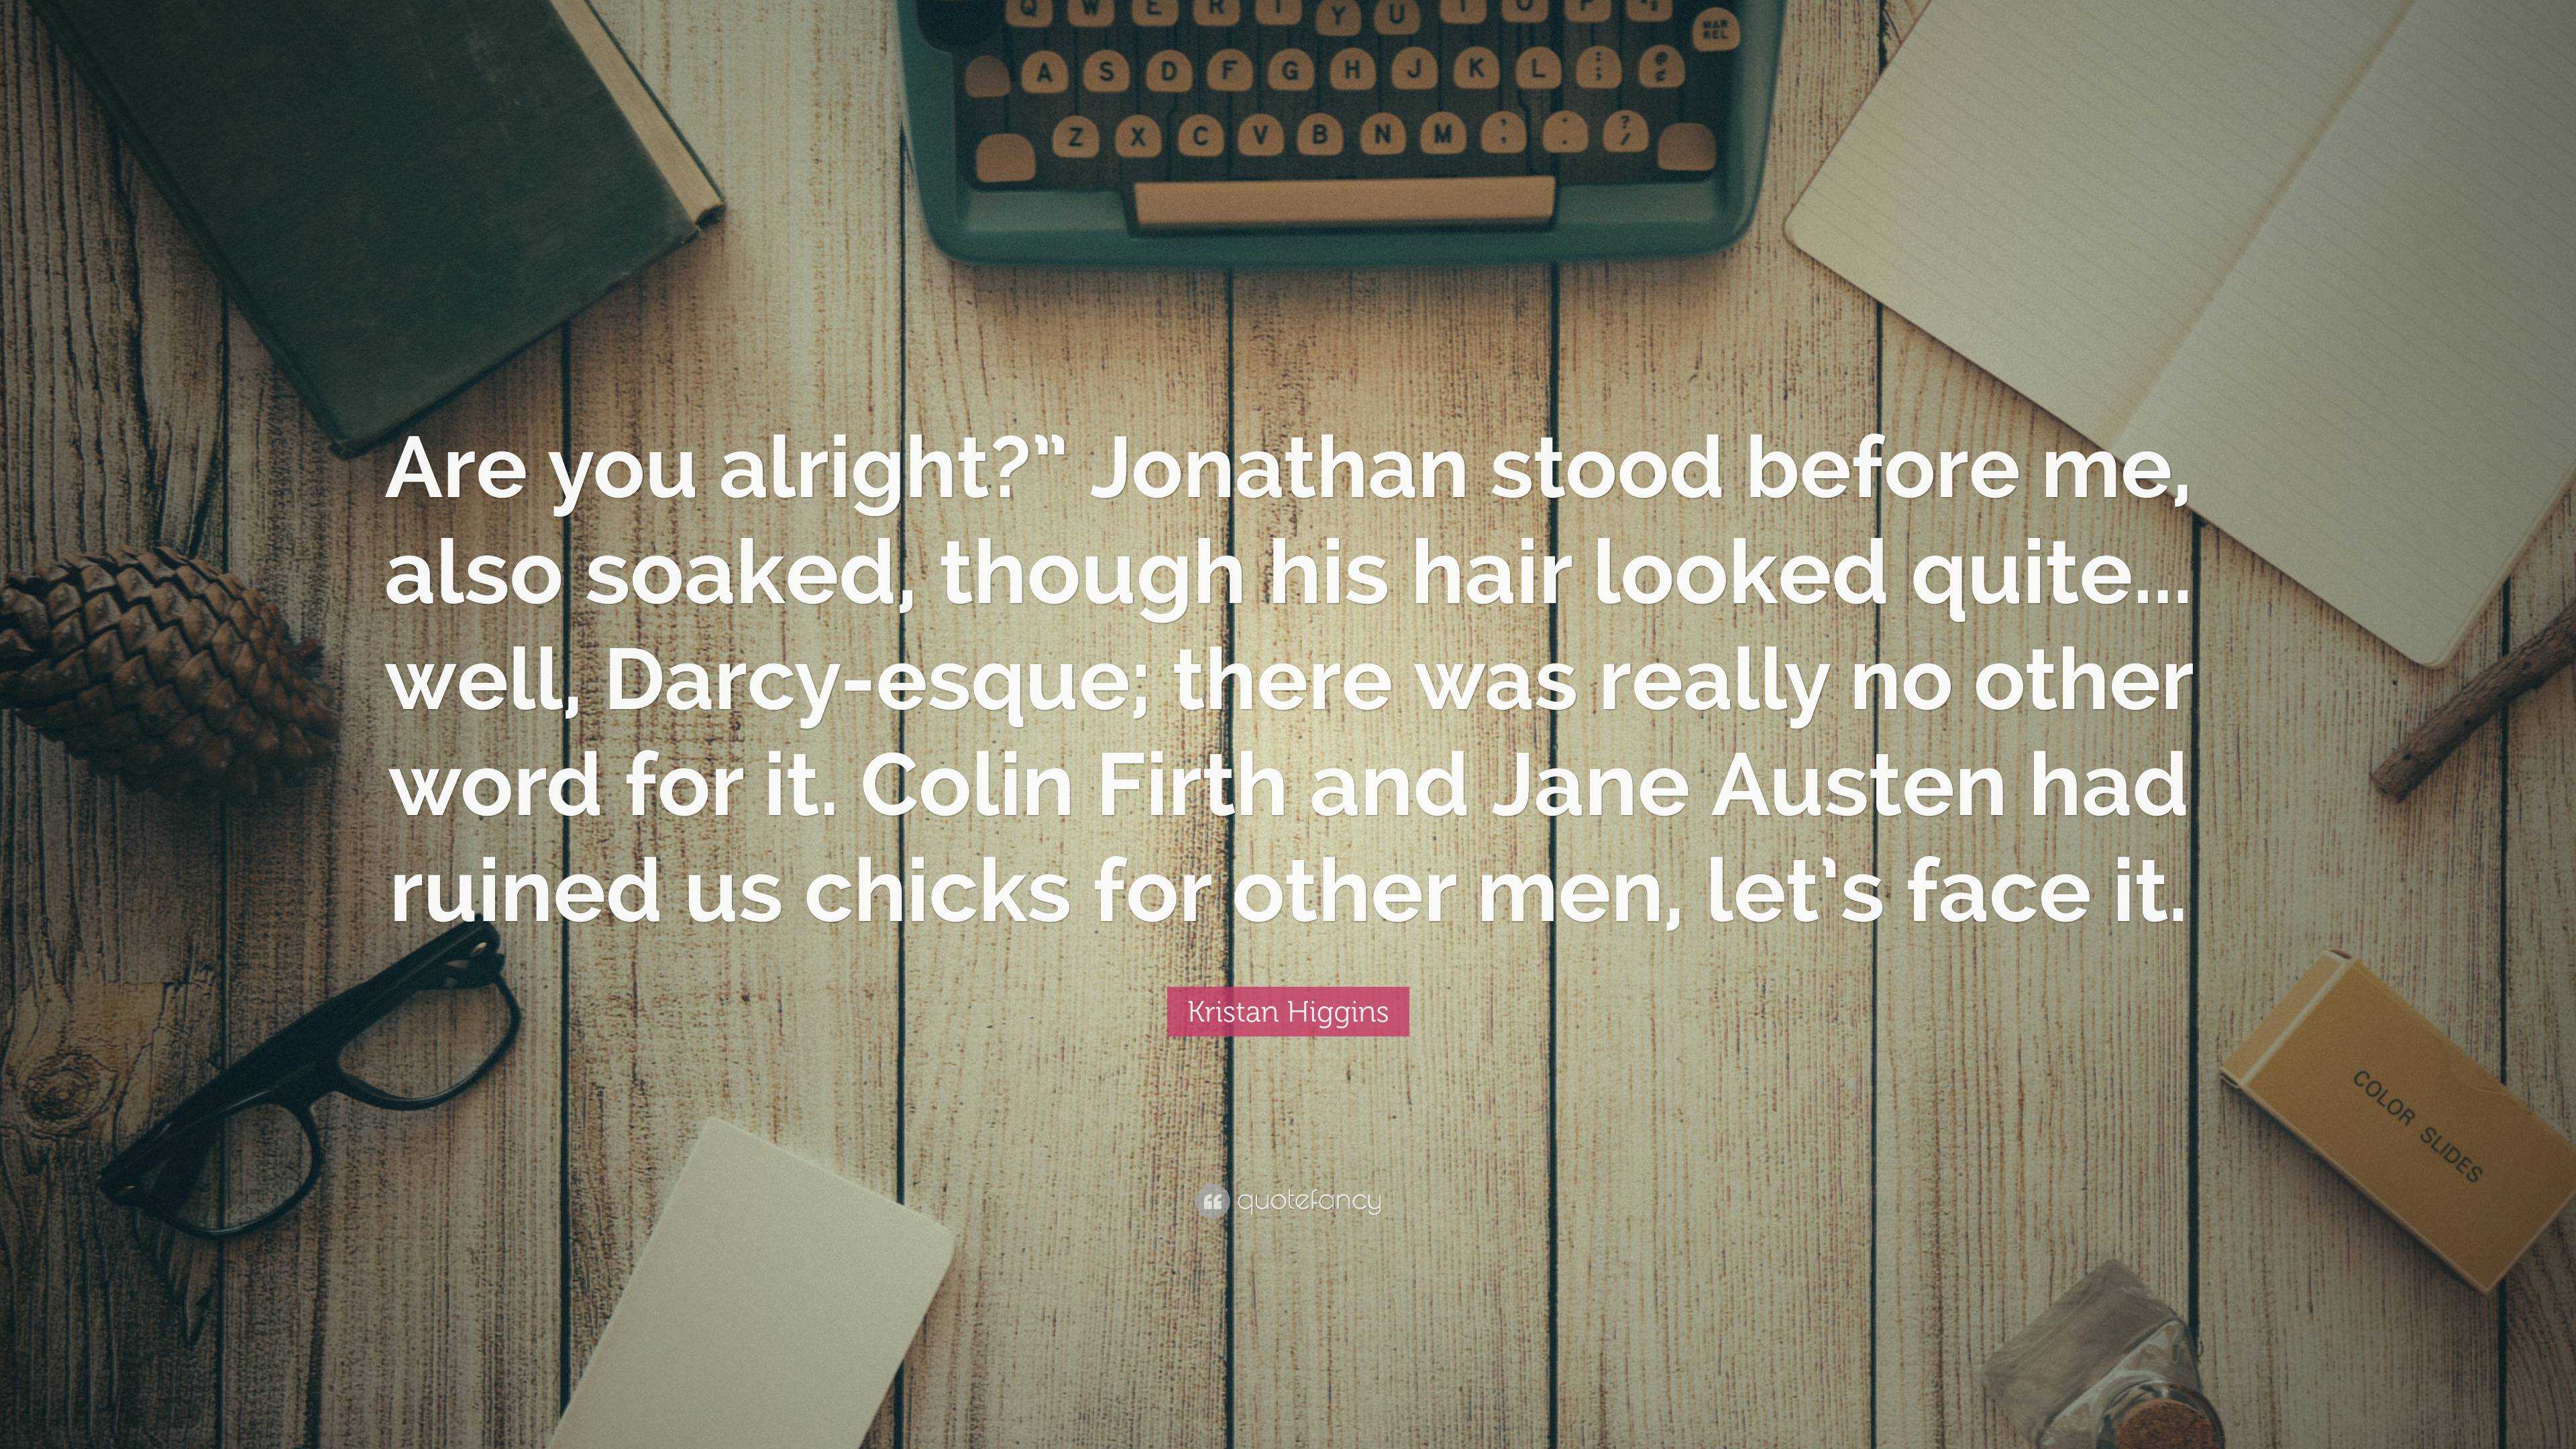 Kristan Higgins Quote: “Are you alright?” Jonathan stood before me, also  soaked, though his hair looked quite... well, Darcy-esque; there was re...”